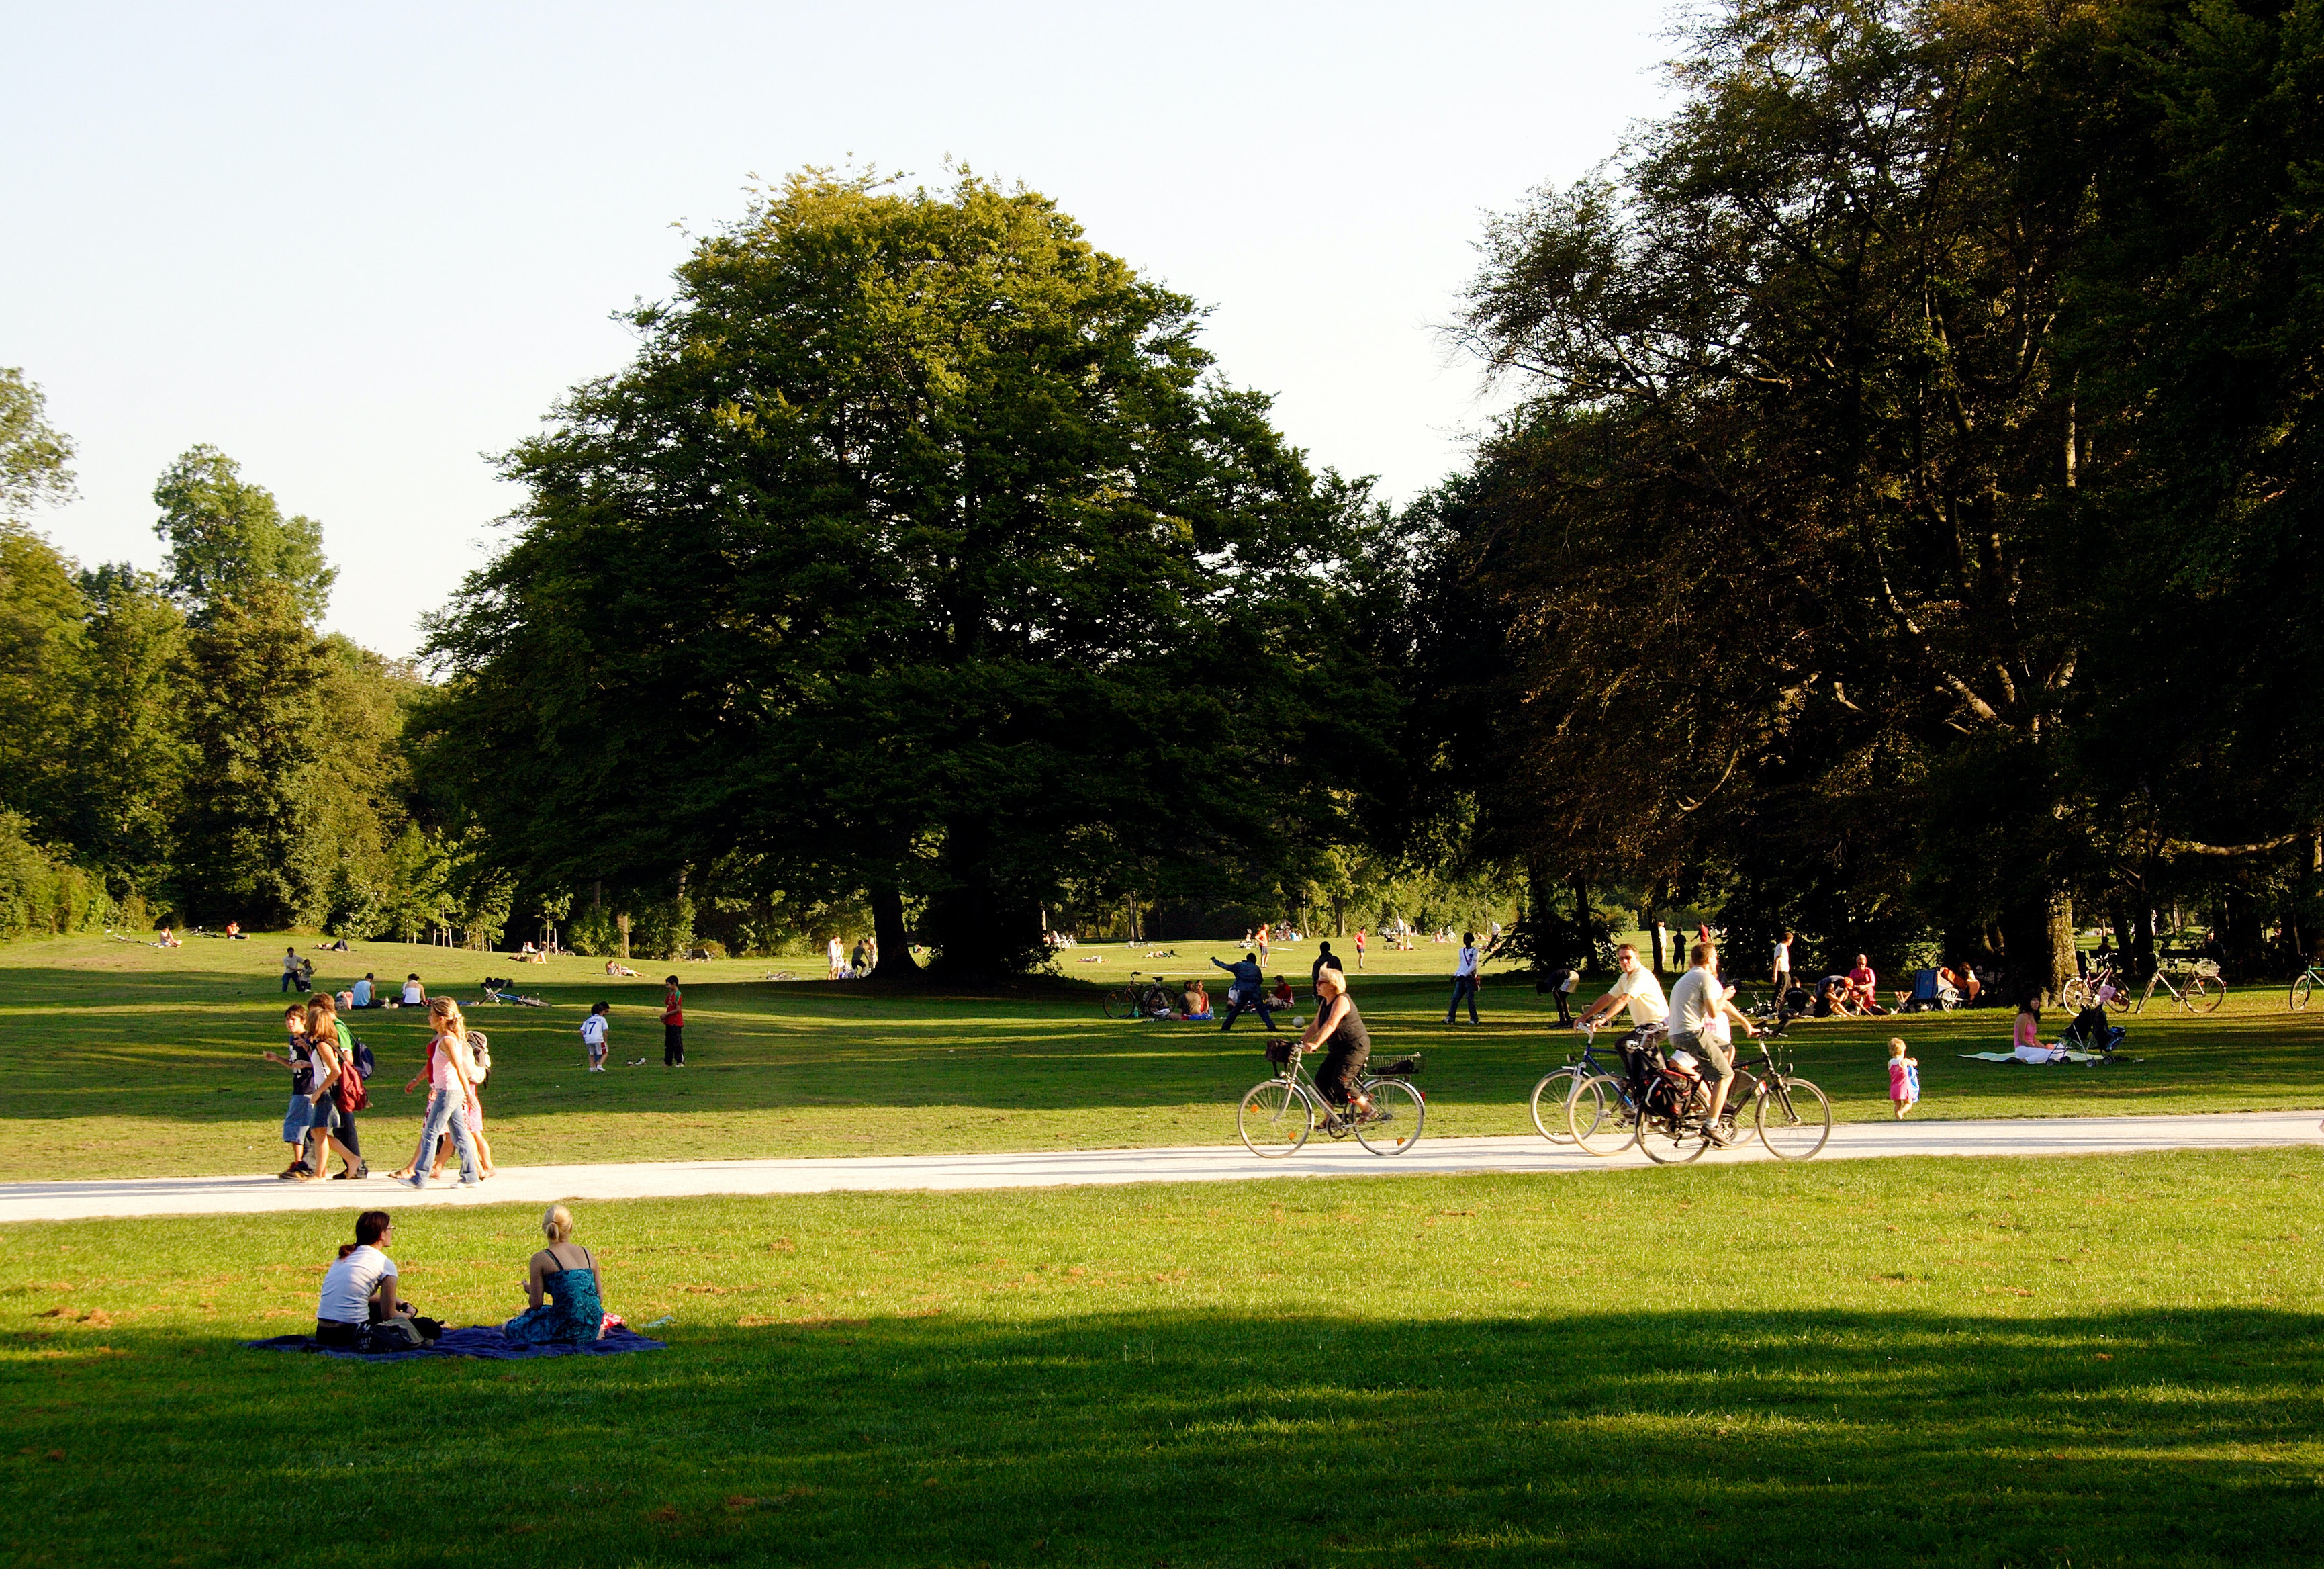 Photograph of a public park with people sitting, walking, and biking.